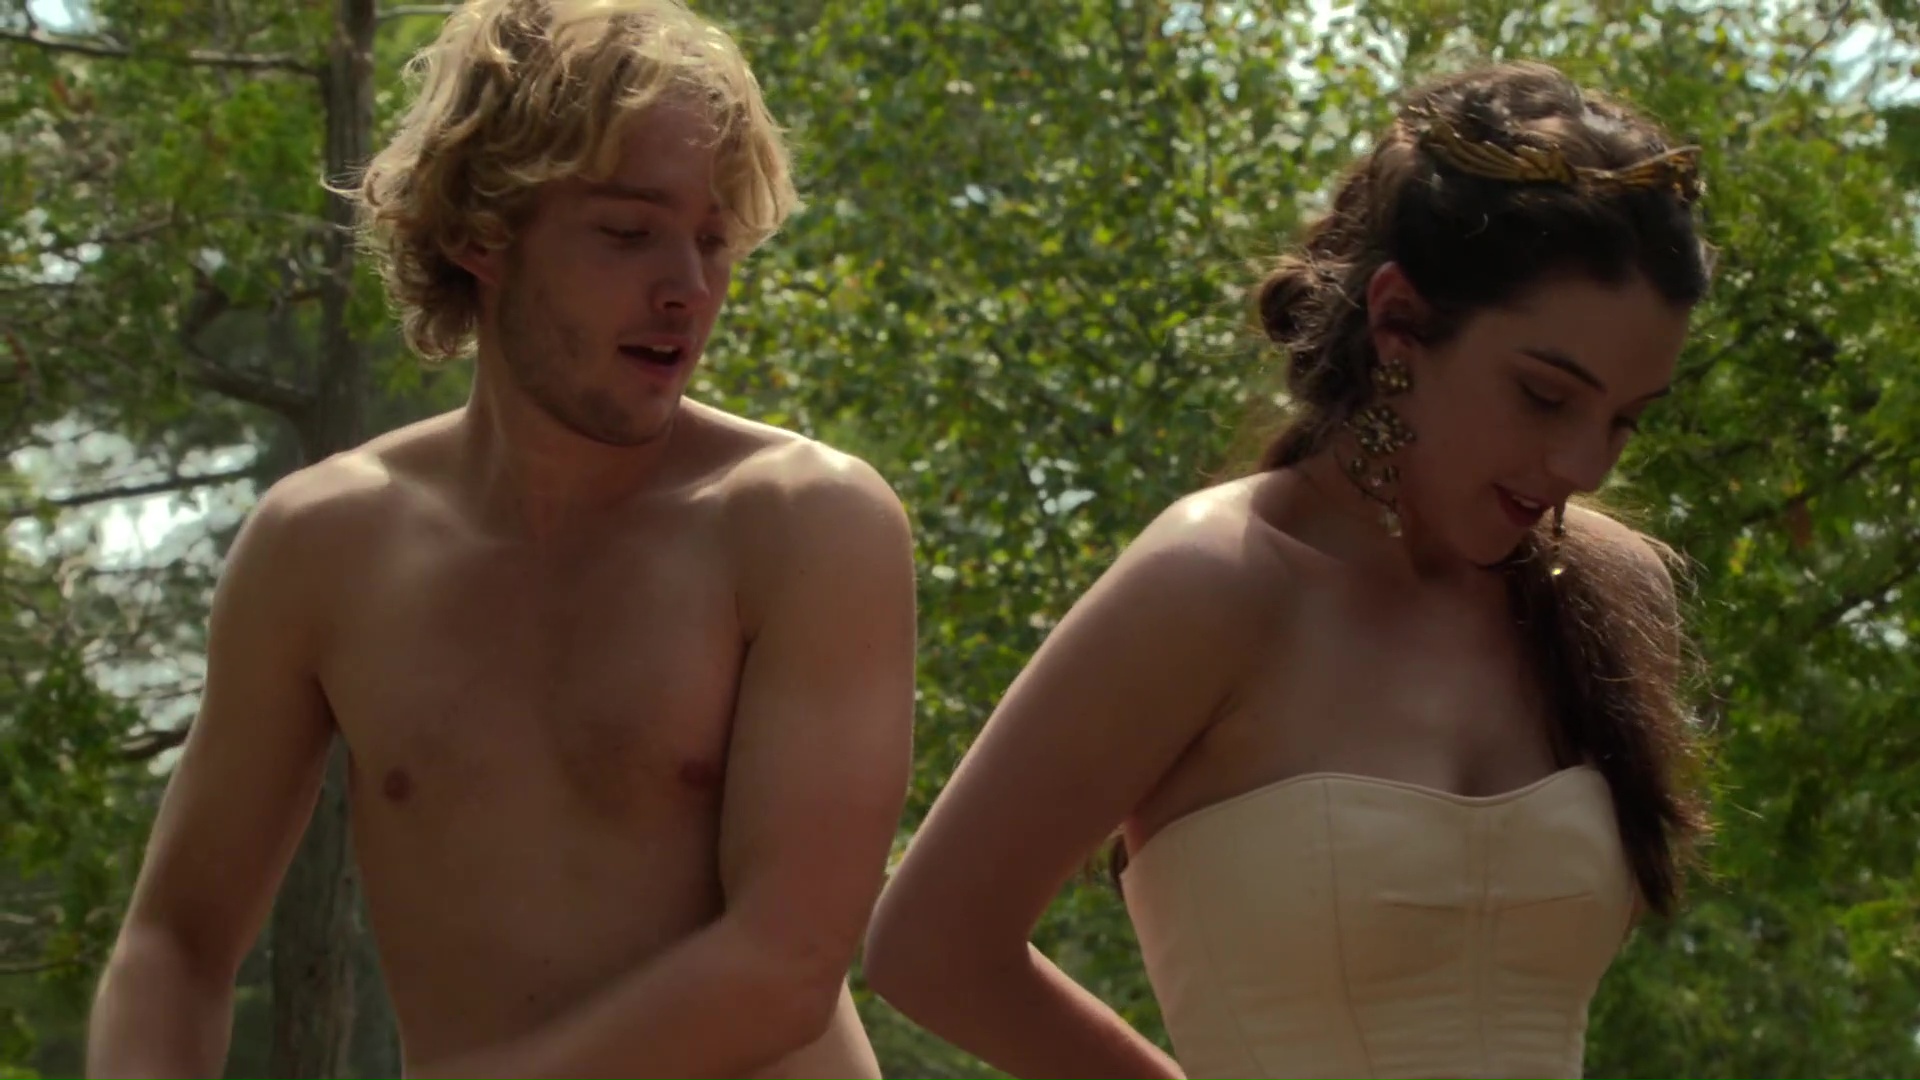 Toby Regbo shirtless in Reign 3-05 "In A Clearing" .